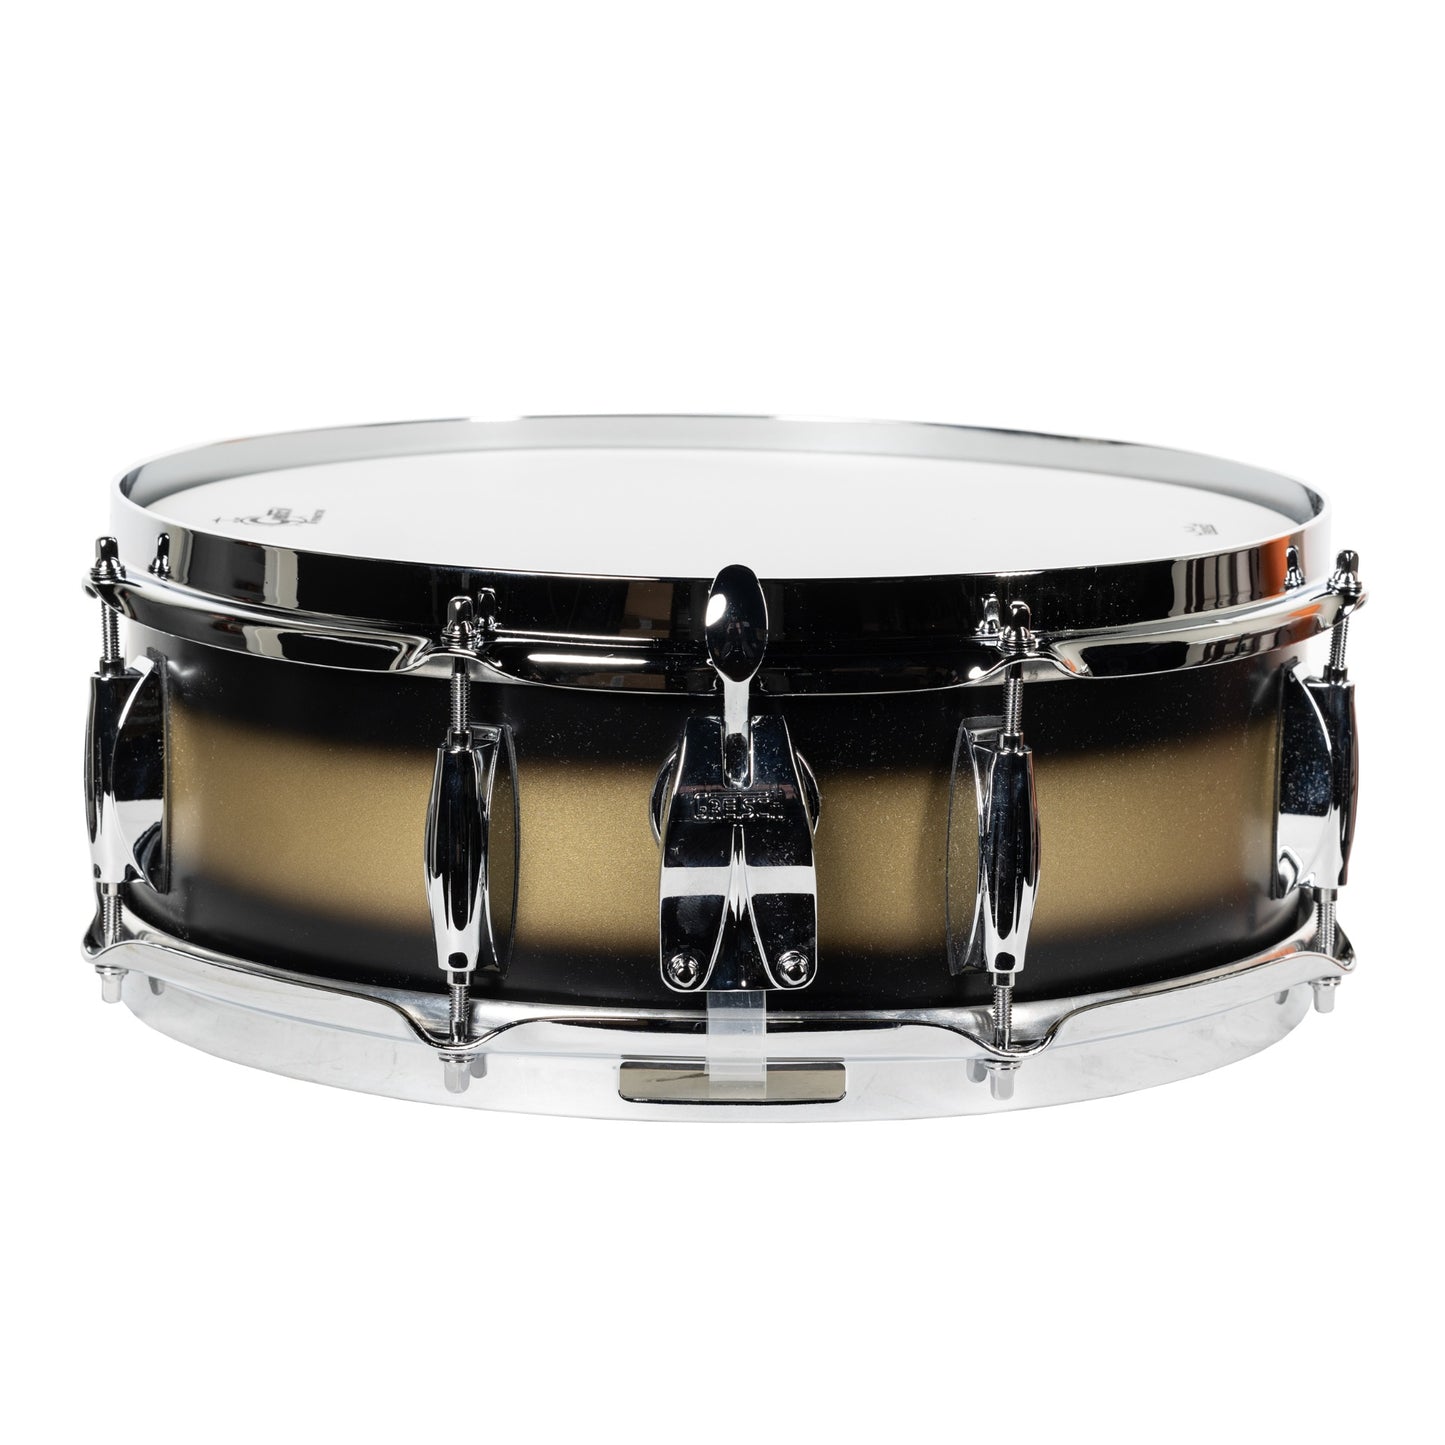 Gretsch Broadkaster 5x14 Snare Drum - Black Gold Duco